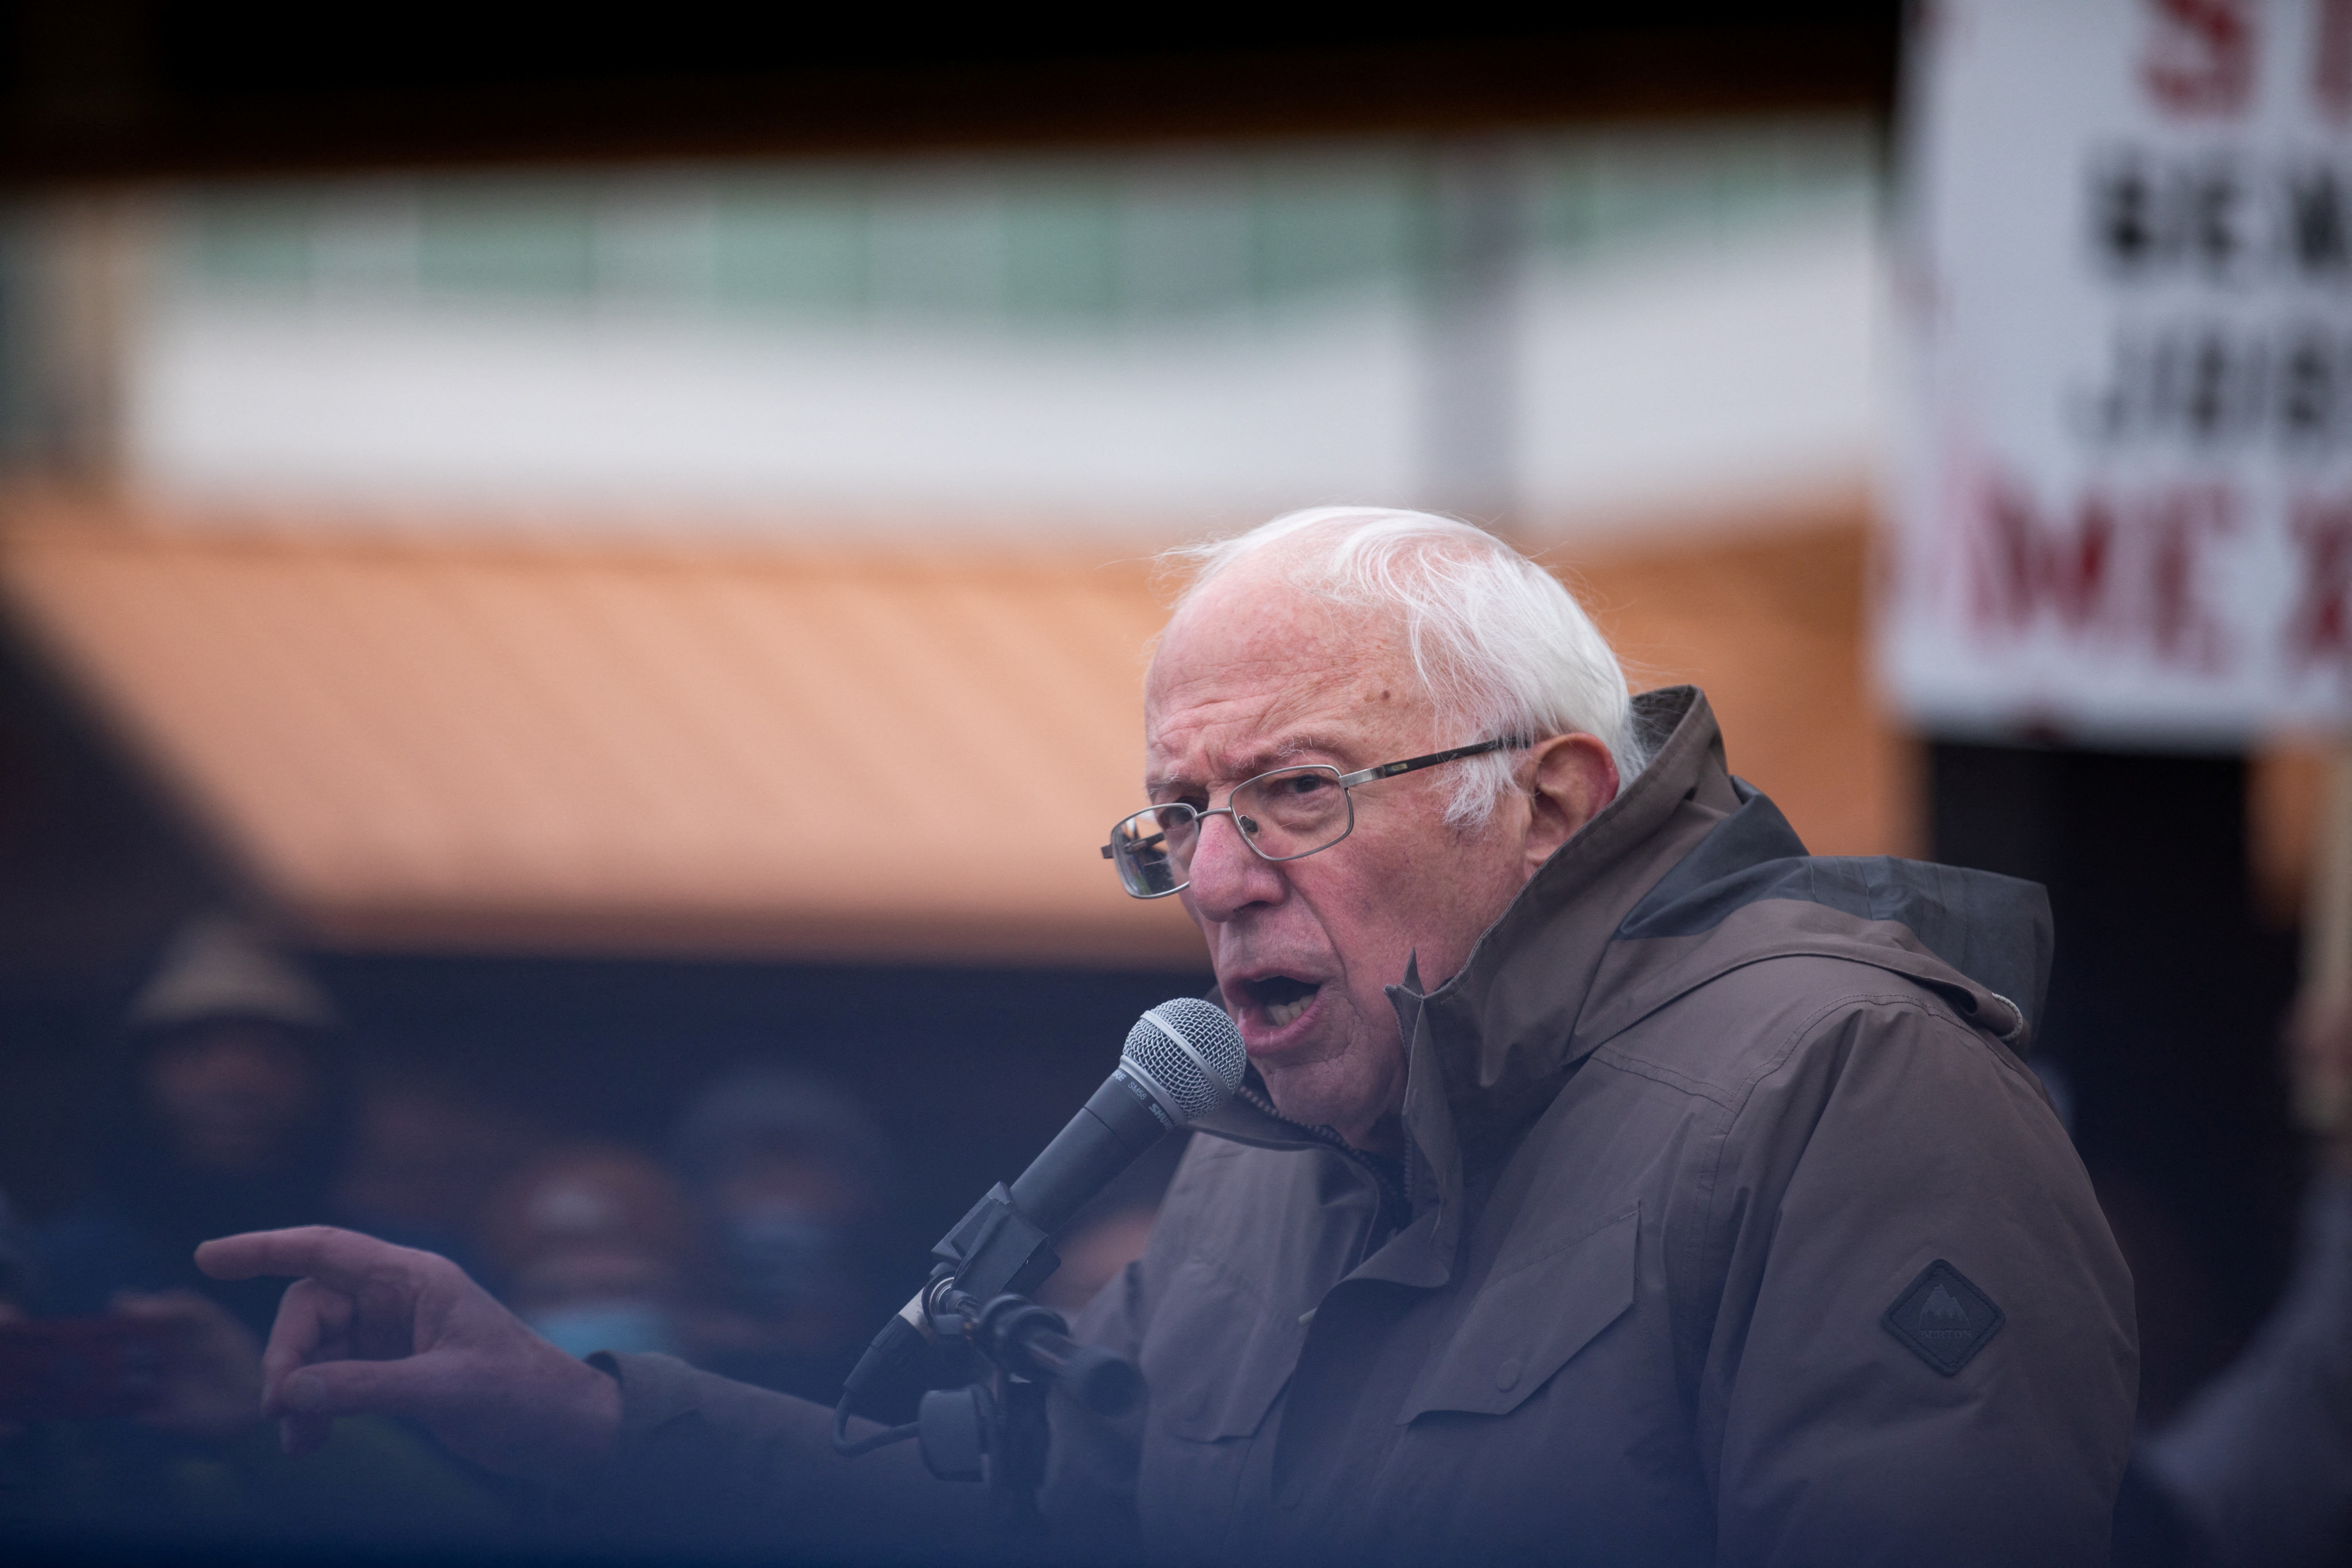 Bernie Sanders shows up to support striking Kellogg workers